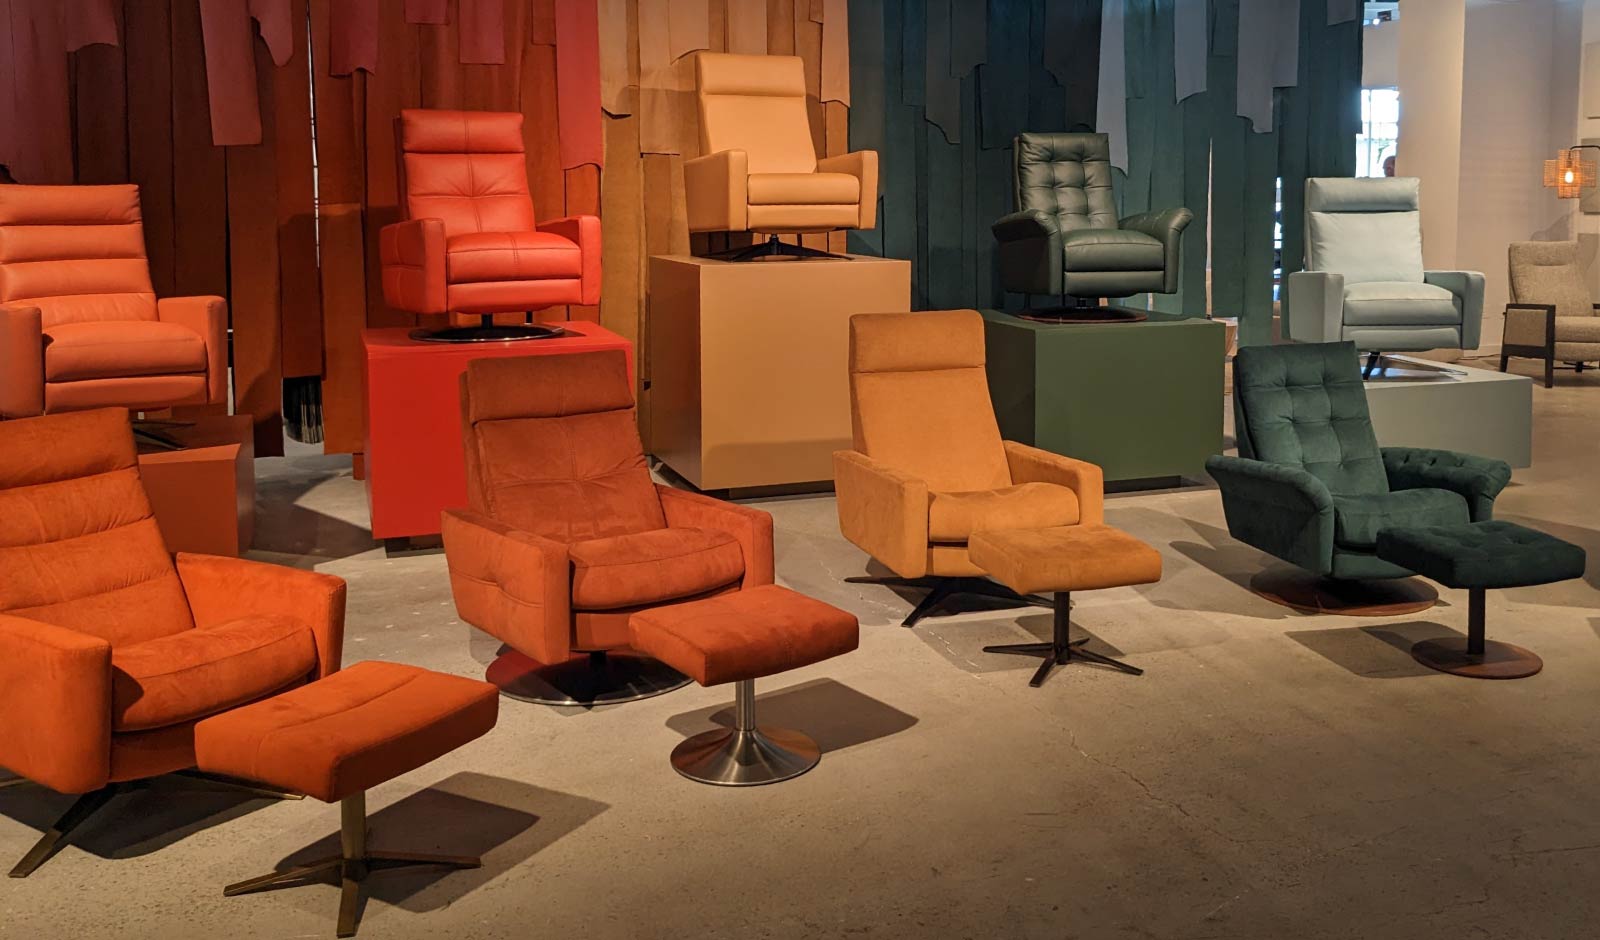 Comfort Air recliners from American Leather in a rainbow of colors -- red, orange, yellow and green